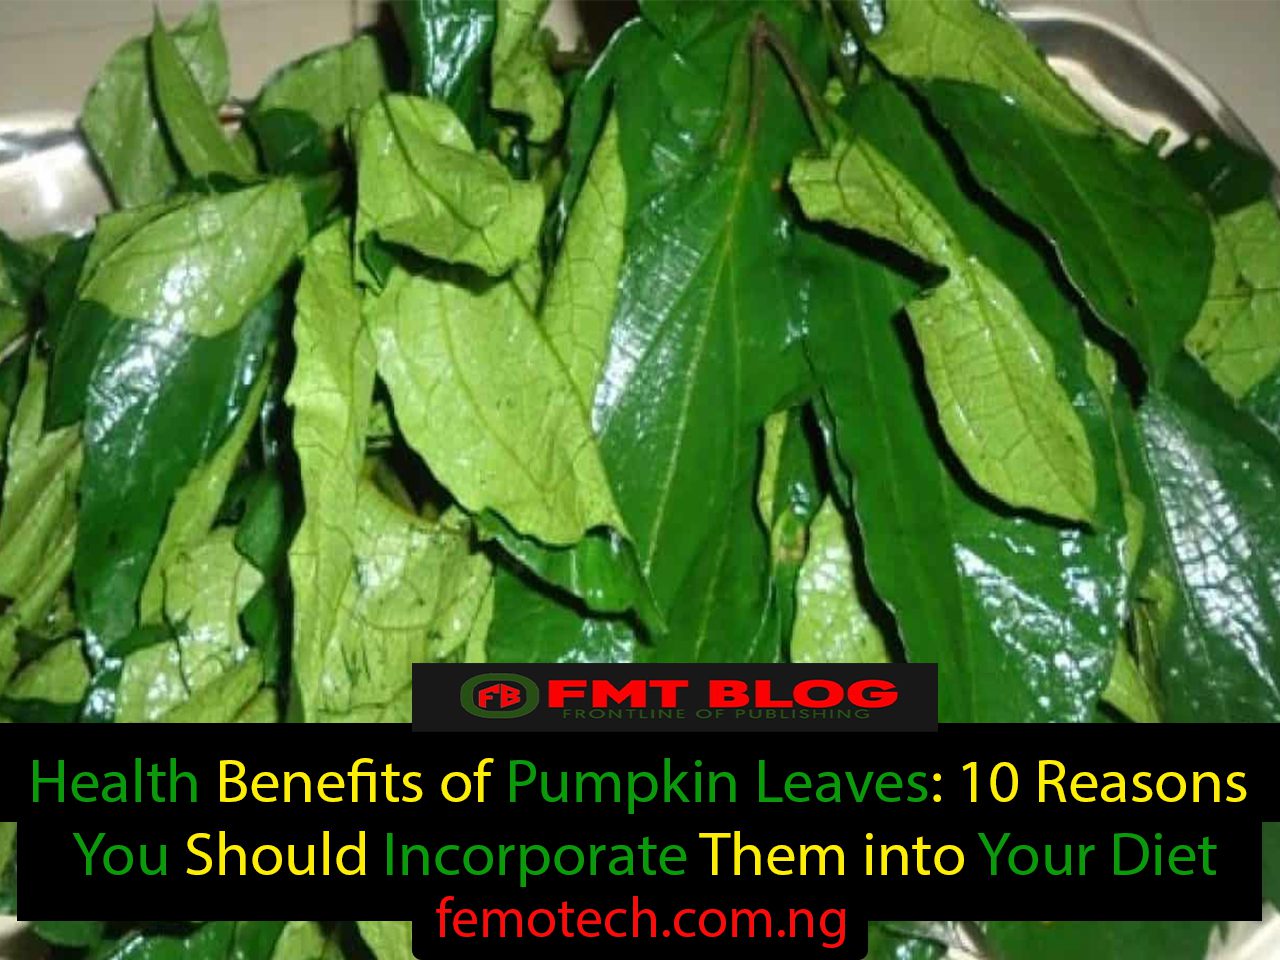 Health Benefits of Pumpkin Leaves: 10 Reasons You Should Incorporate It into Your Diet